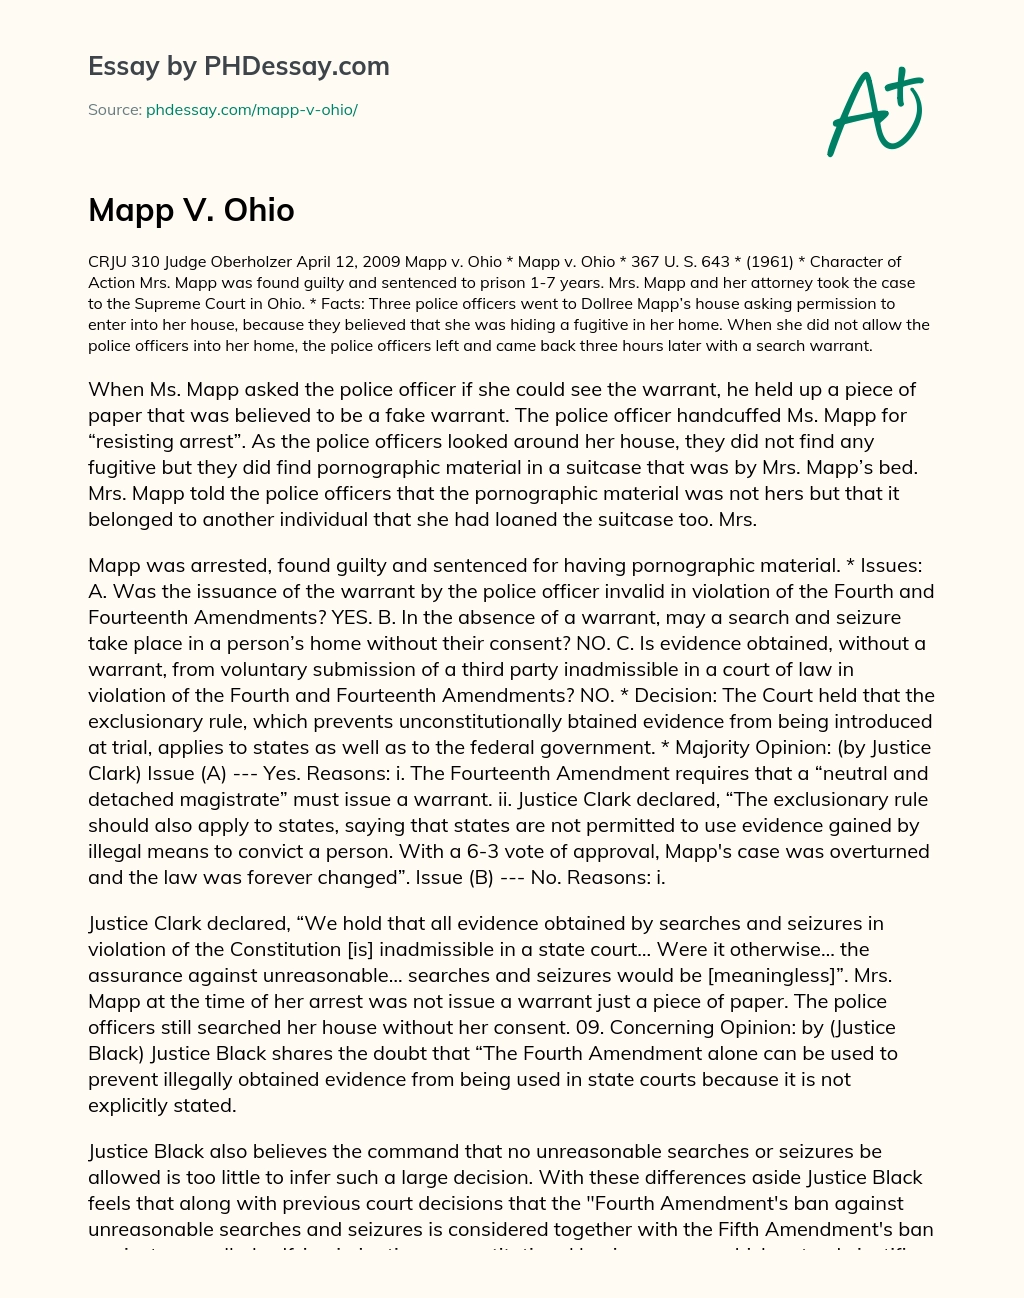 Mapp v. Ohio: Illegal Search and Seizure by Police Officers essay